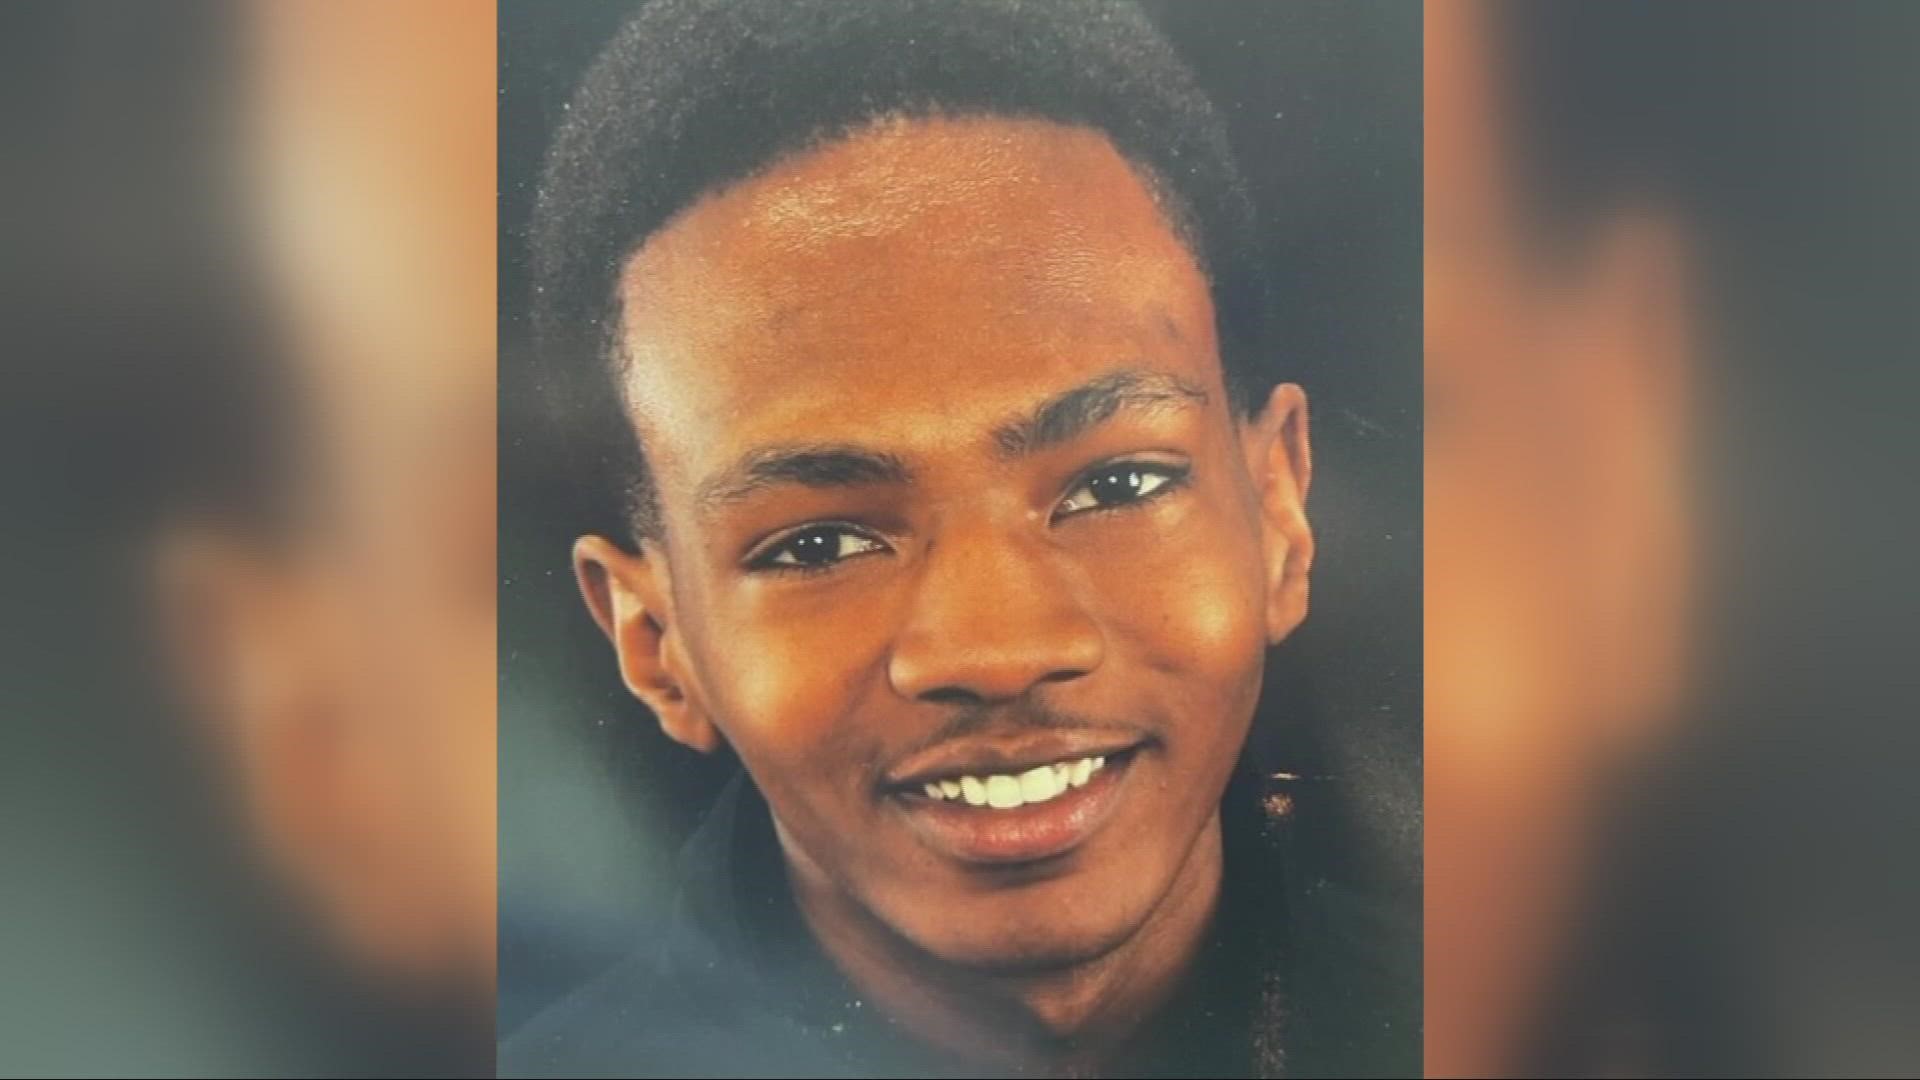 We're following the latest updates on the Akron police shooting death of 25-year-old Jayland Walker.